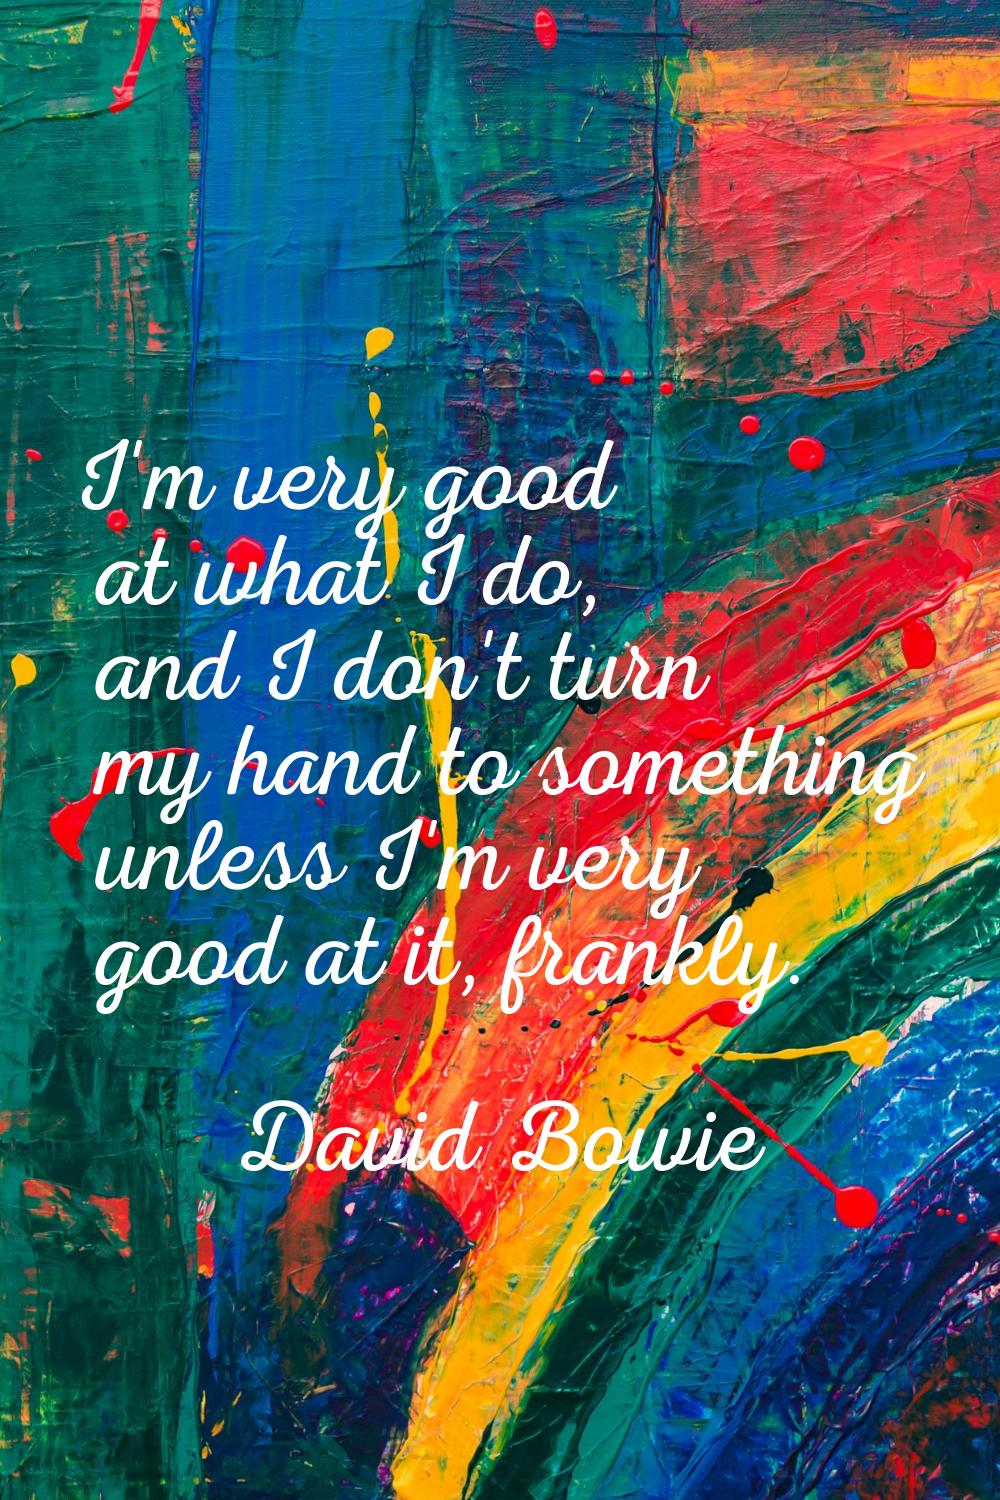 I'm very good at what I do, and I don't turn my hand to something unless I'm very good at it, frank